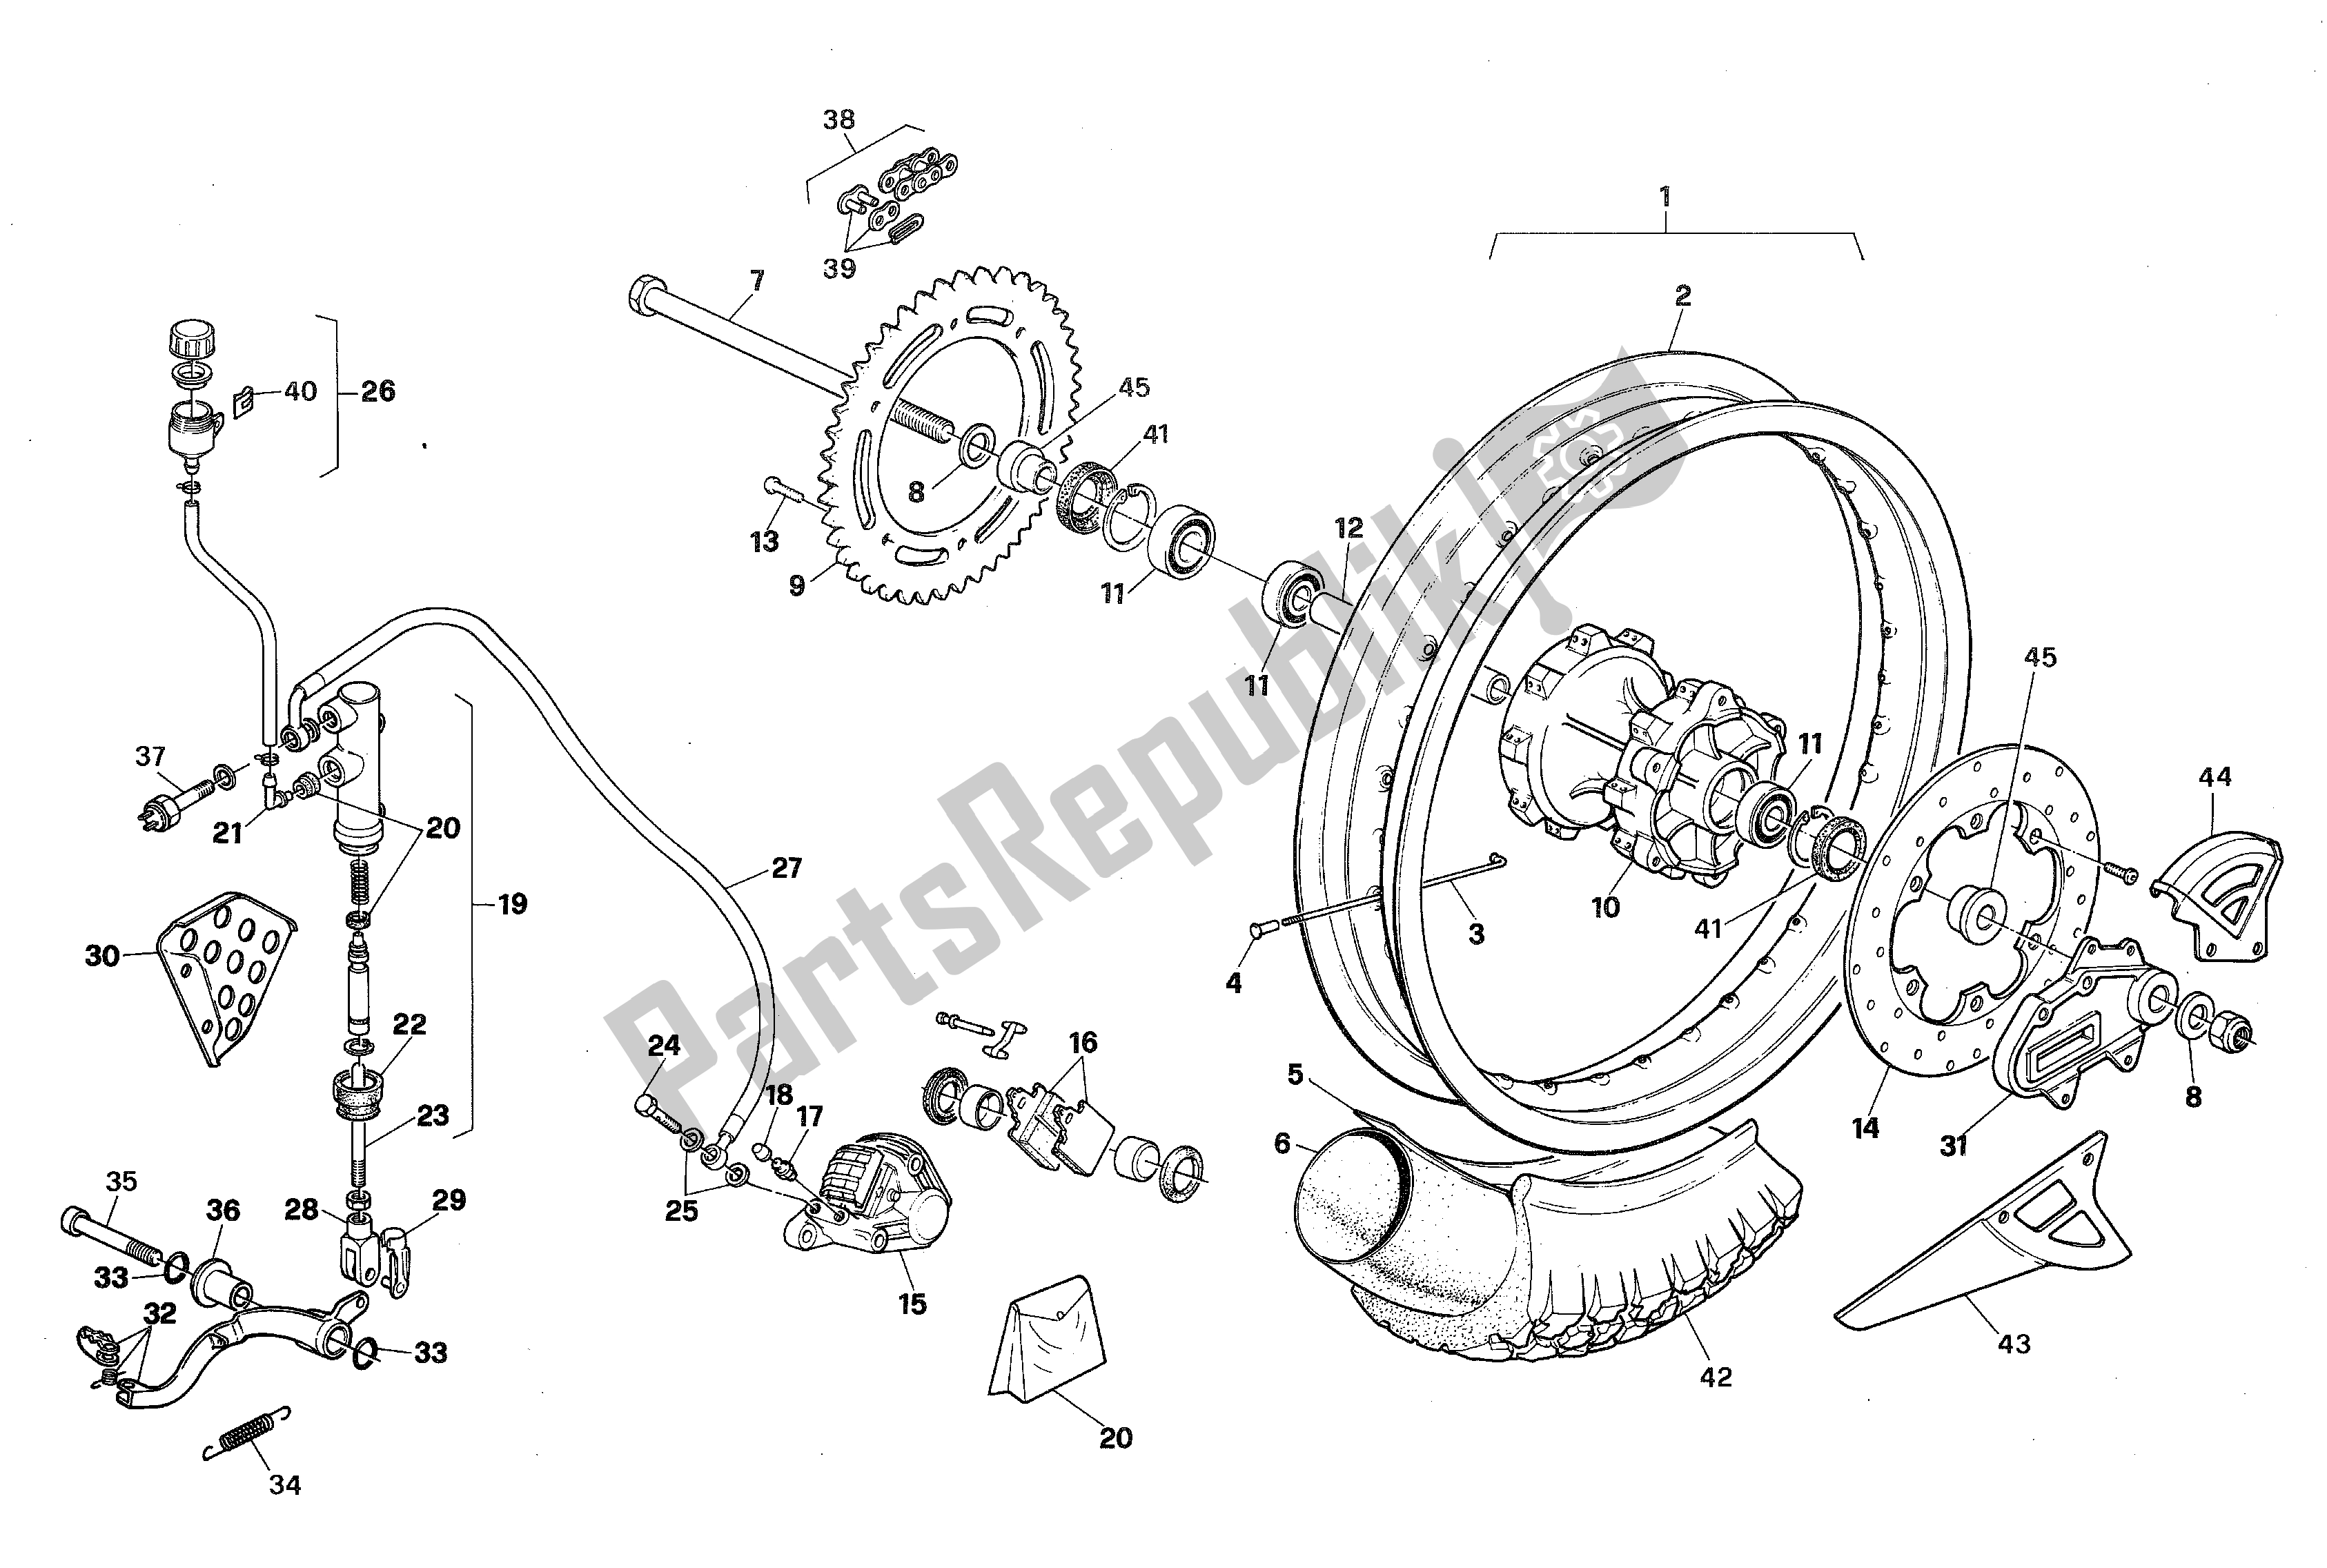 All parts for the Rear Wheel of the Aprilia RX 125 1989